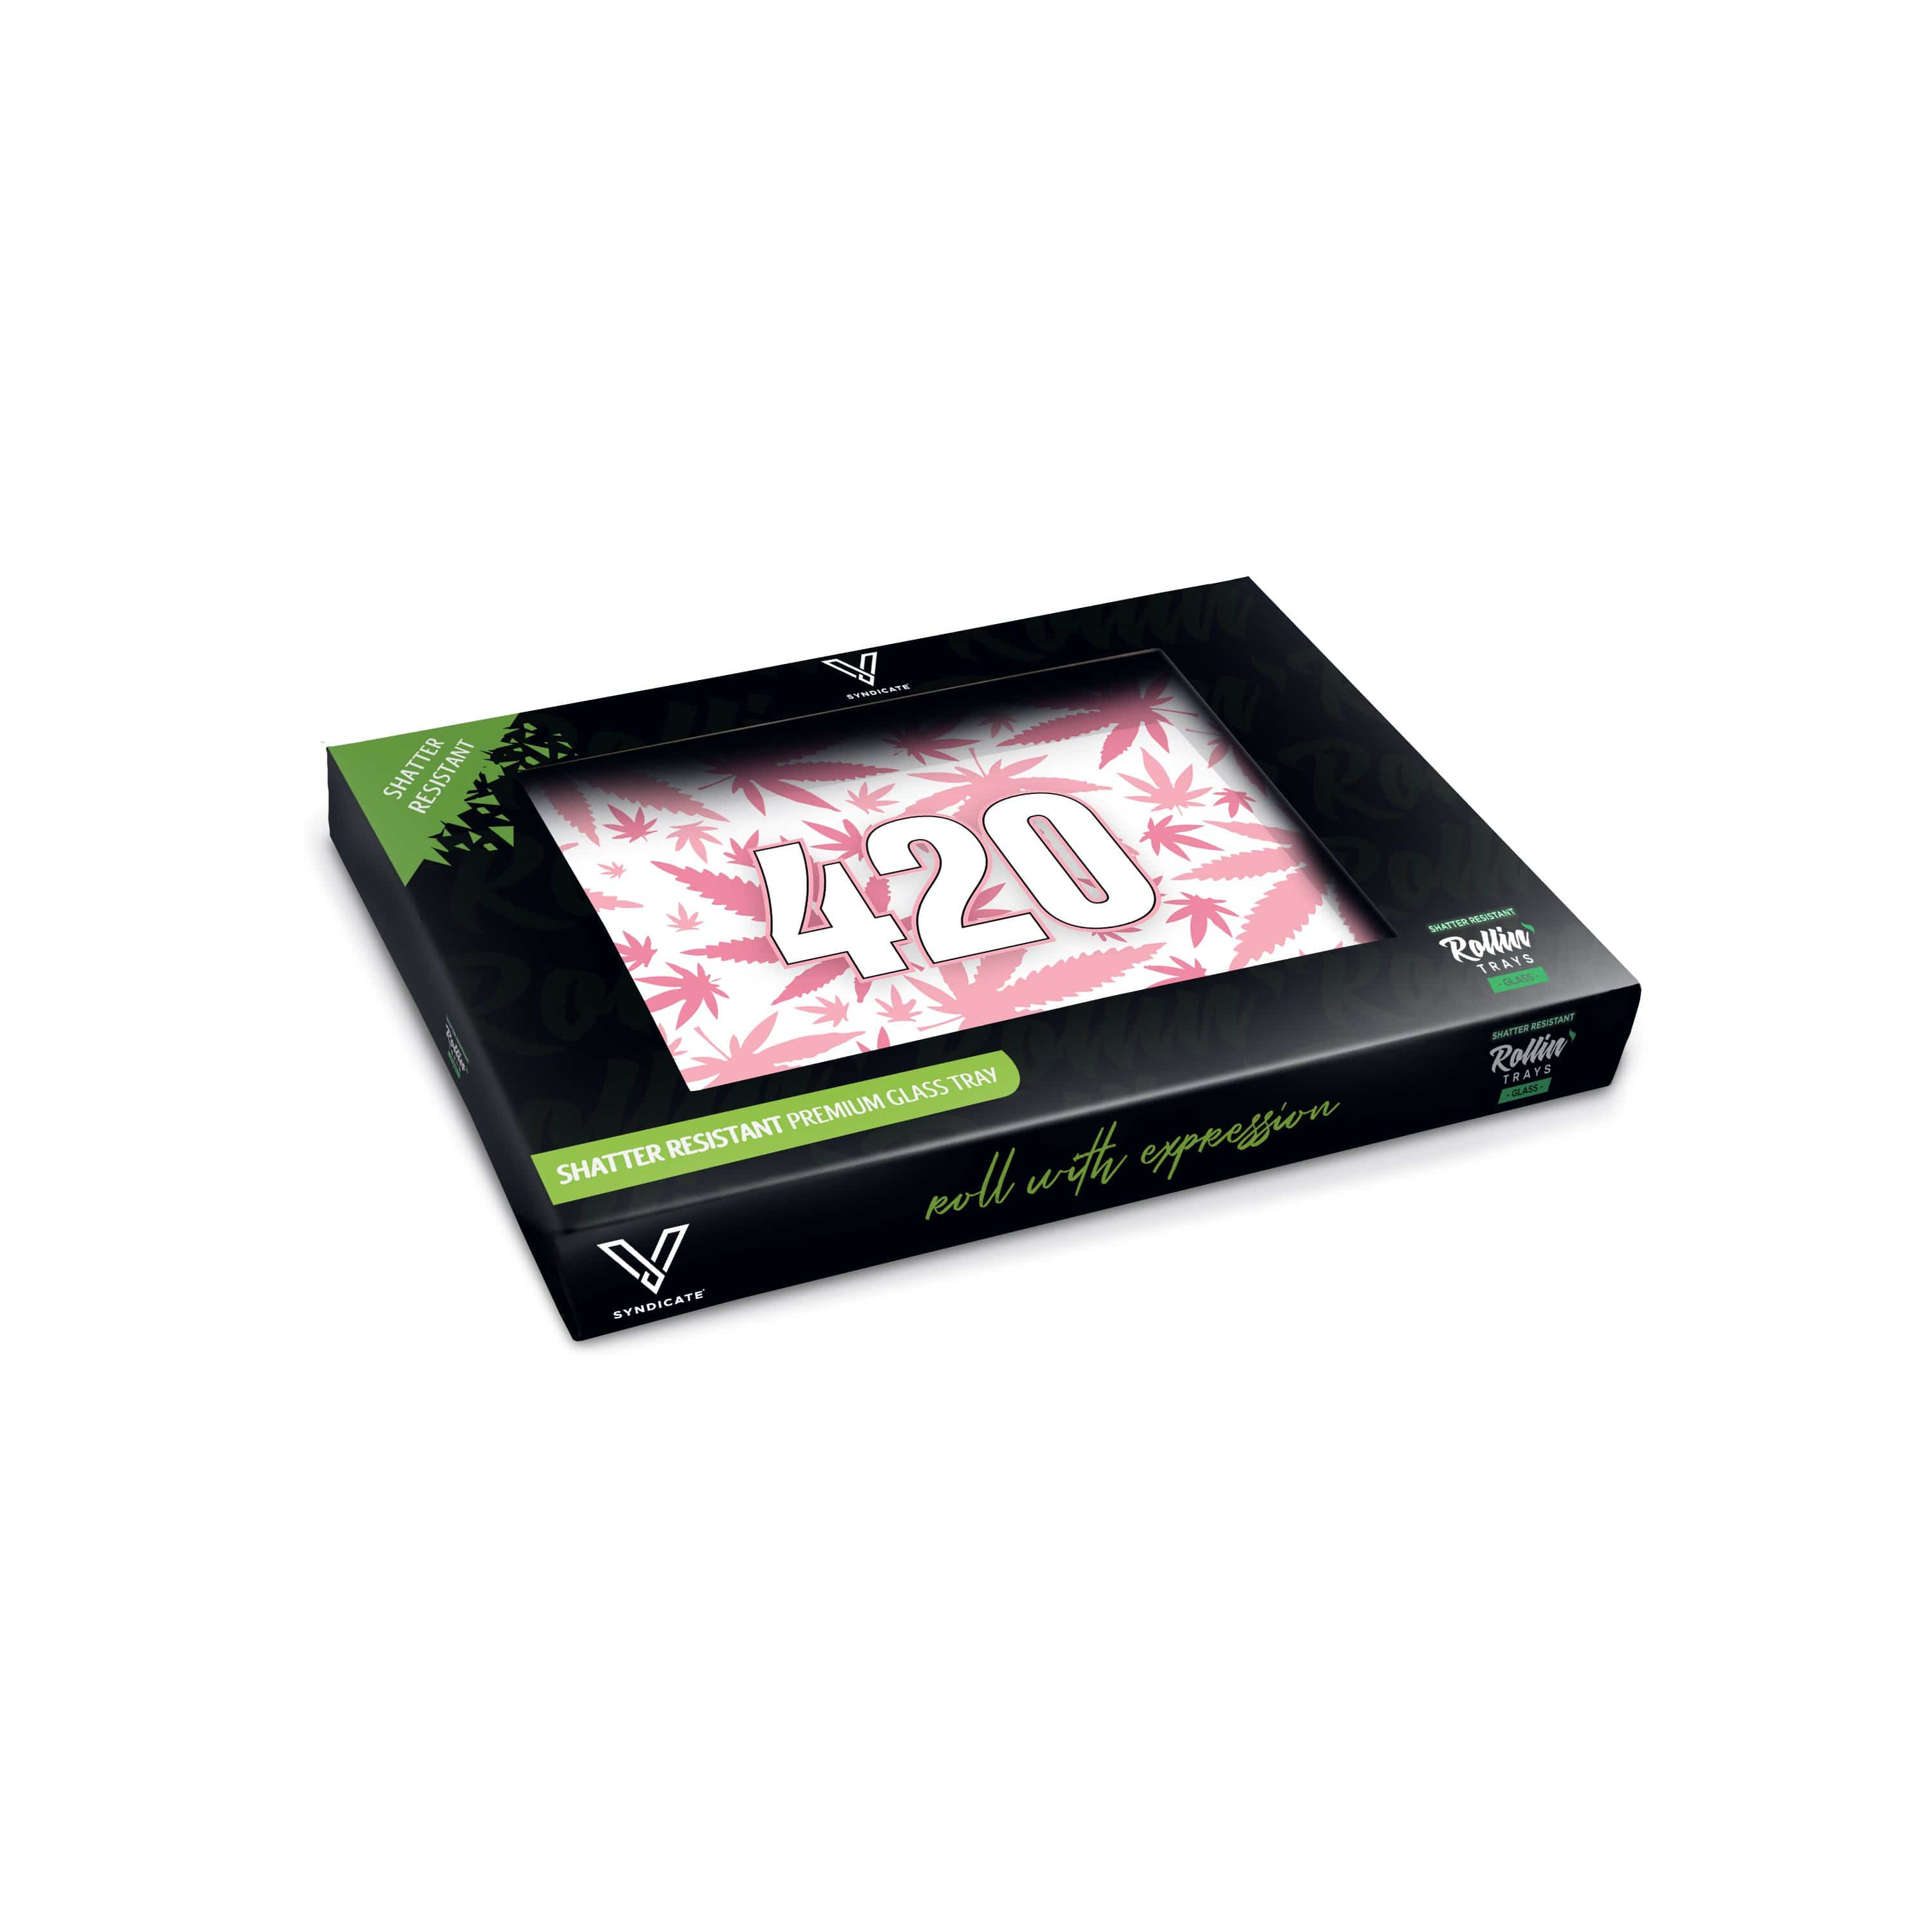 Call of Doobie Metal Rollin' Tray – V Syndicate